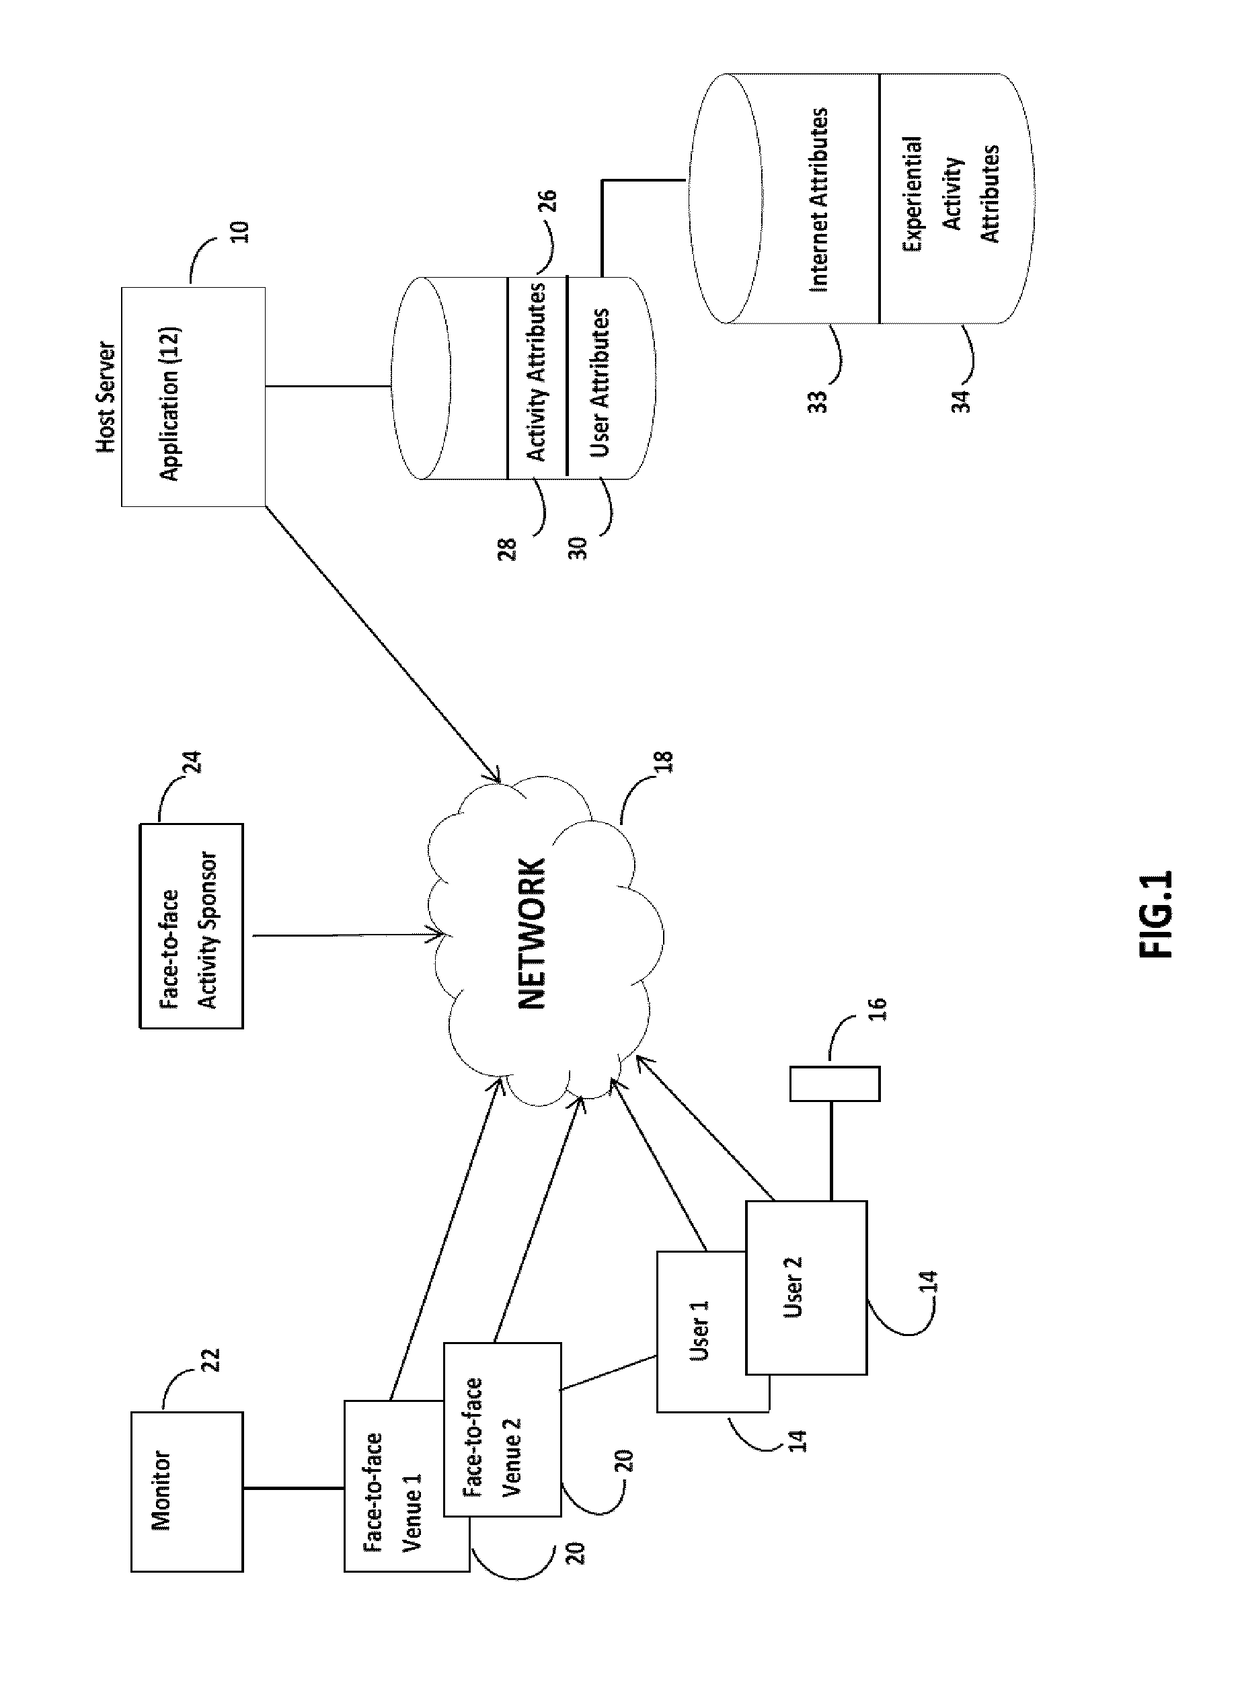 An Activity-Centric System And Method For Relationship Matching